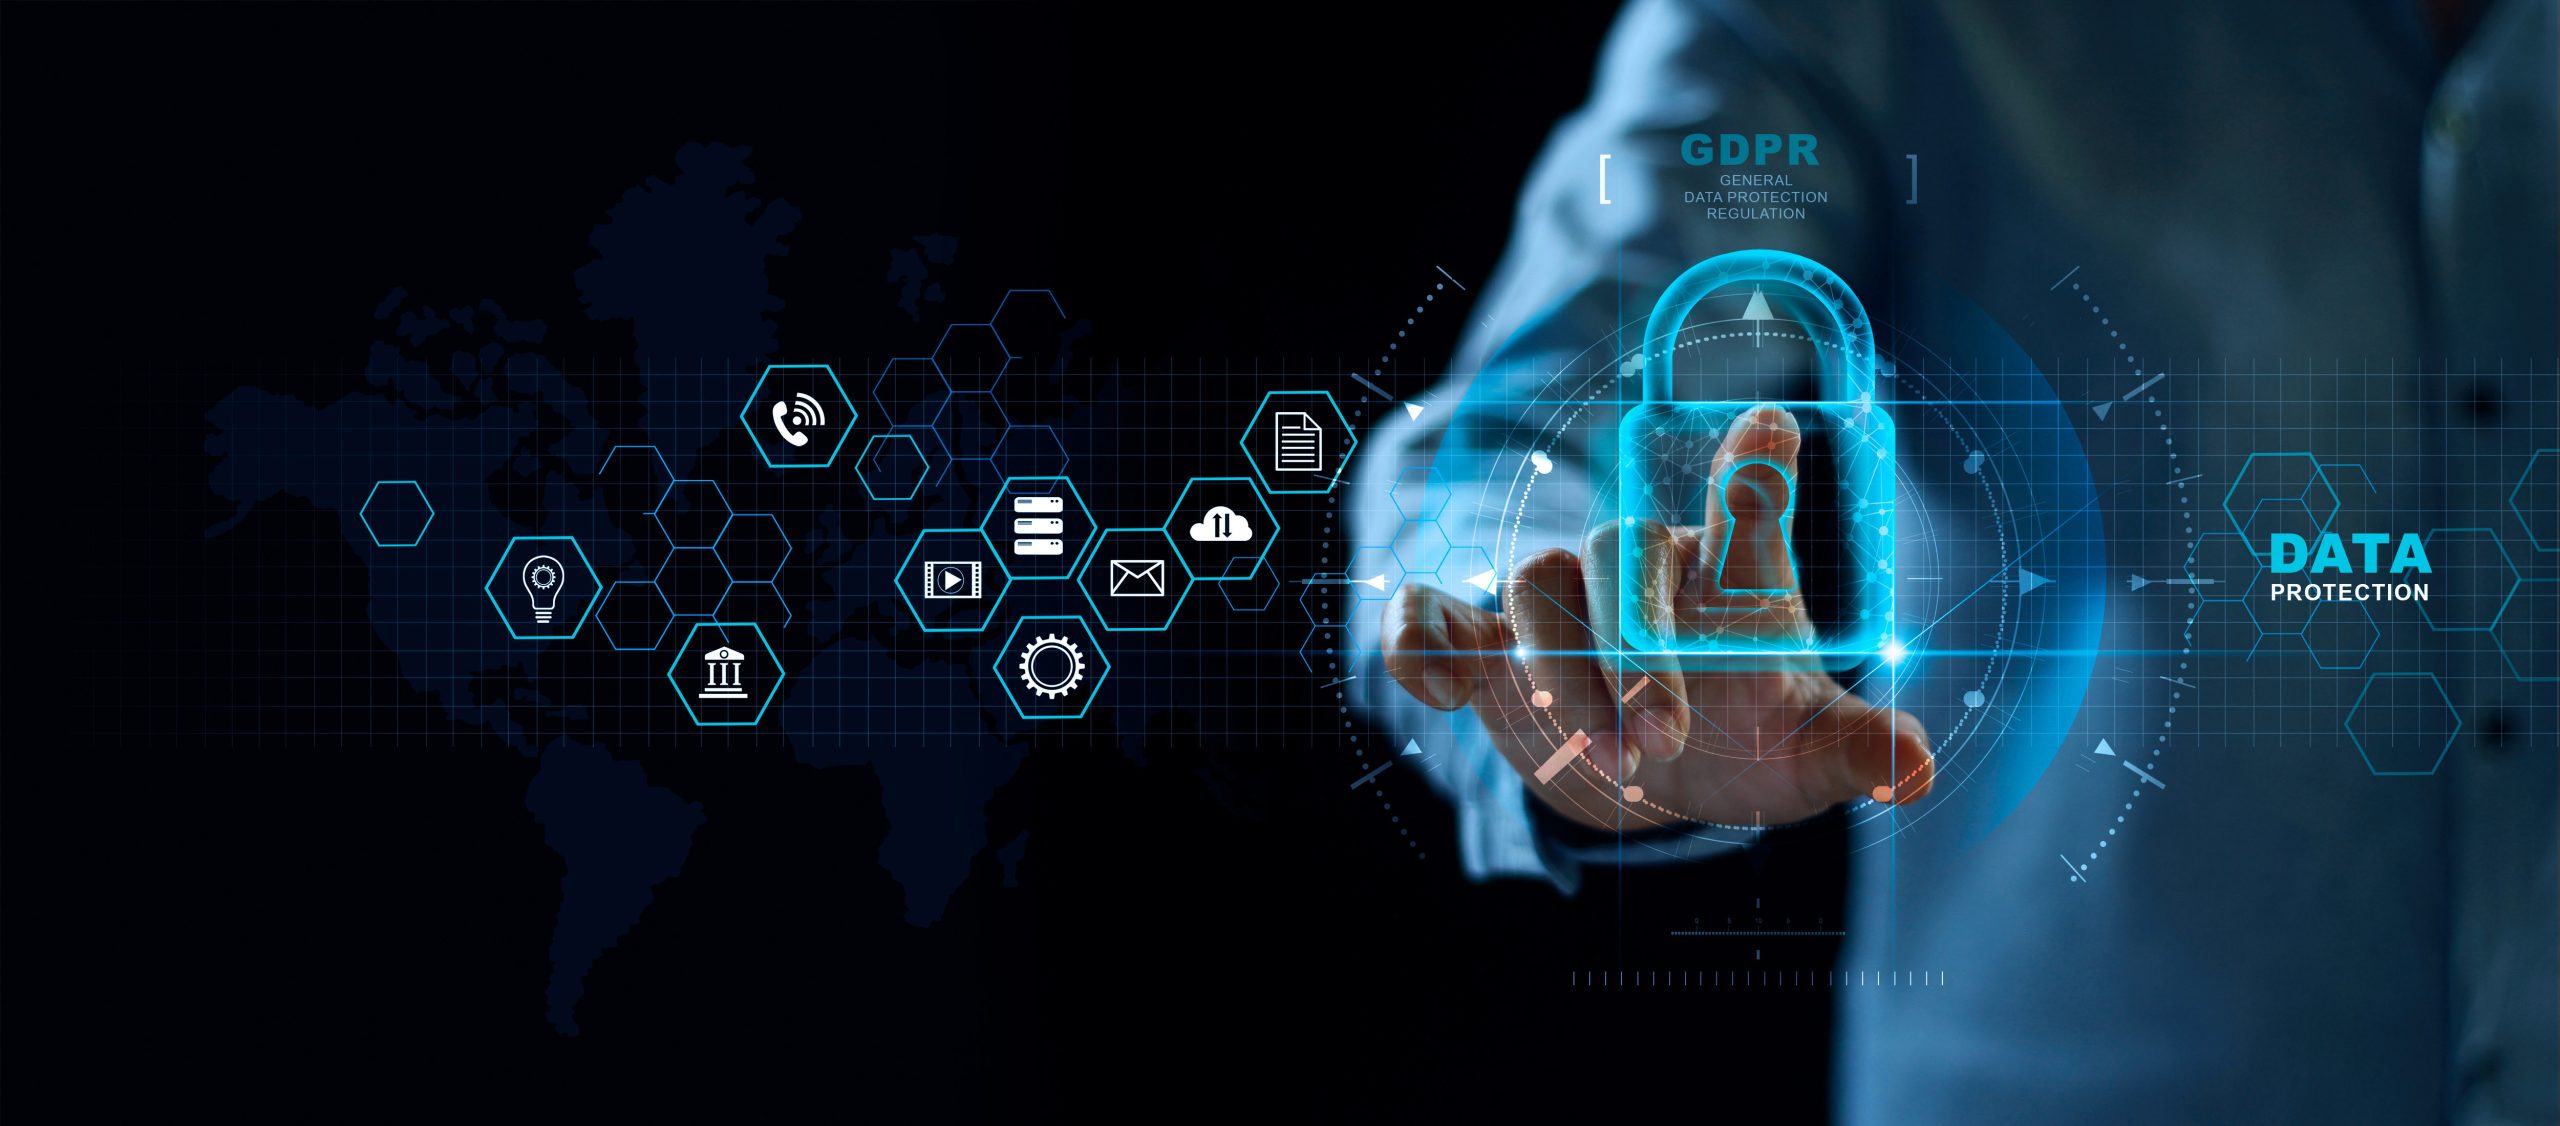 Data protection privacy concept. GDPR. EU. Cyber security network. Business man protecting data personal information on tablet and virtual interface. Padlock icon and internet technology networking connection on digital